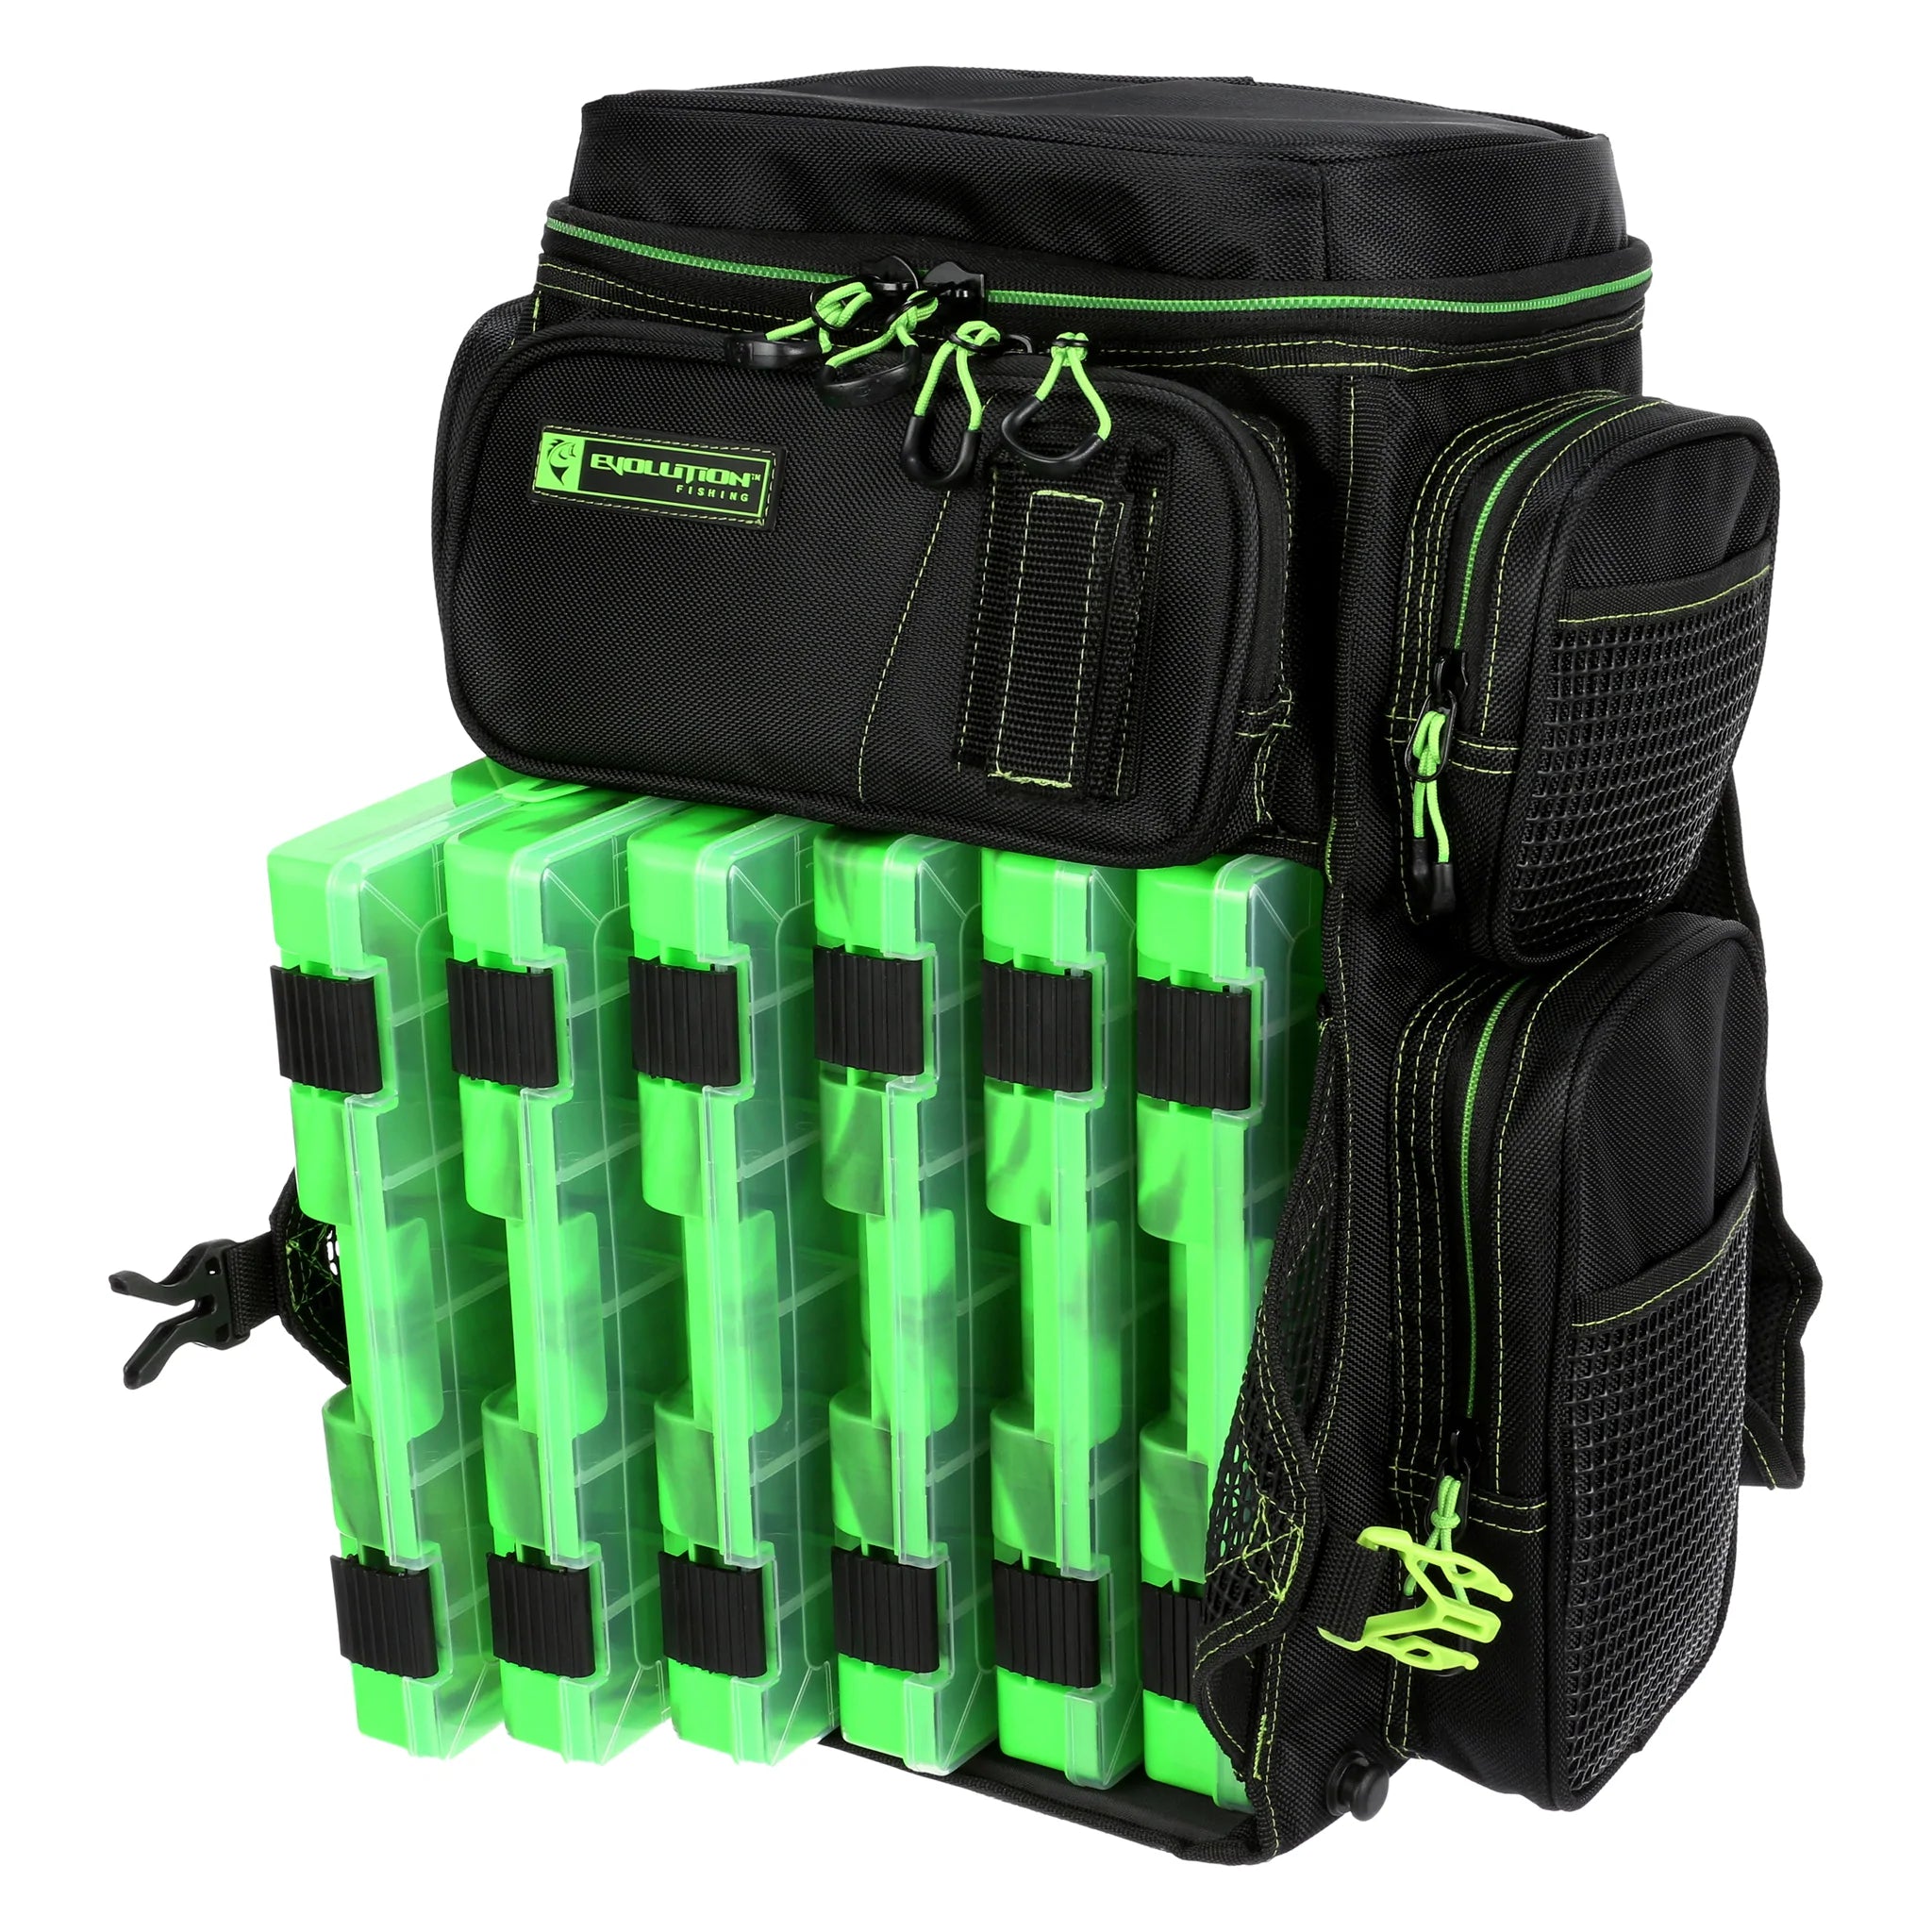 Evolution Outdoor 3600 Drift Tackle Backpack - Tackle Boxes & Bags